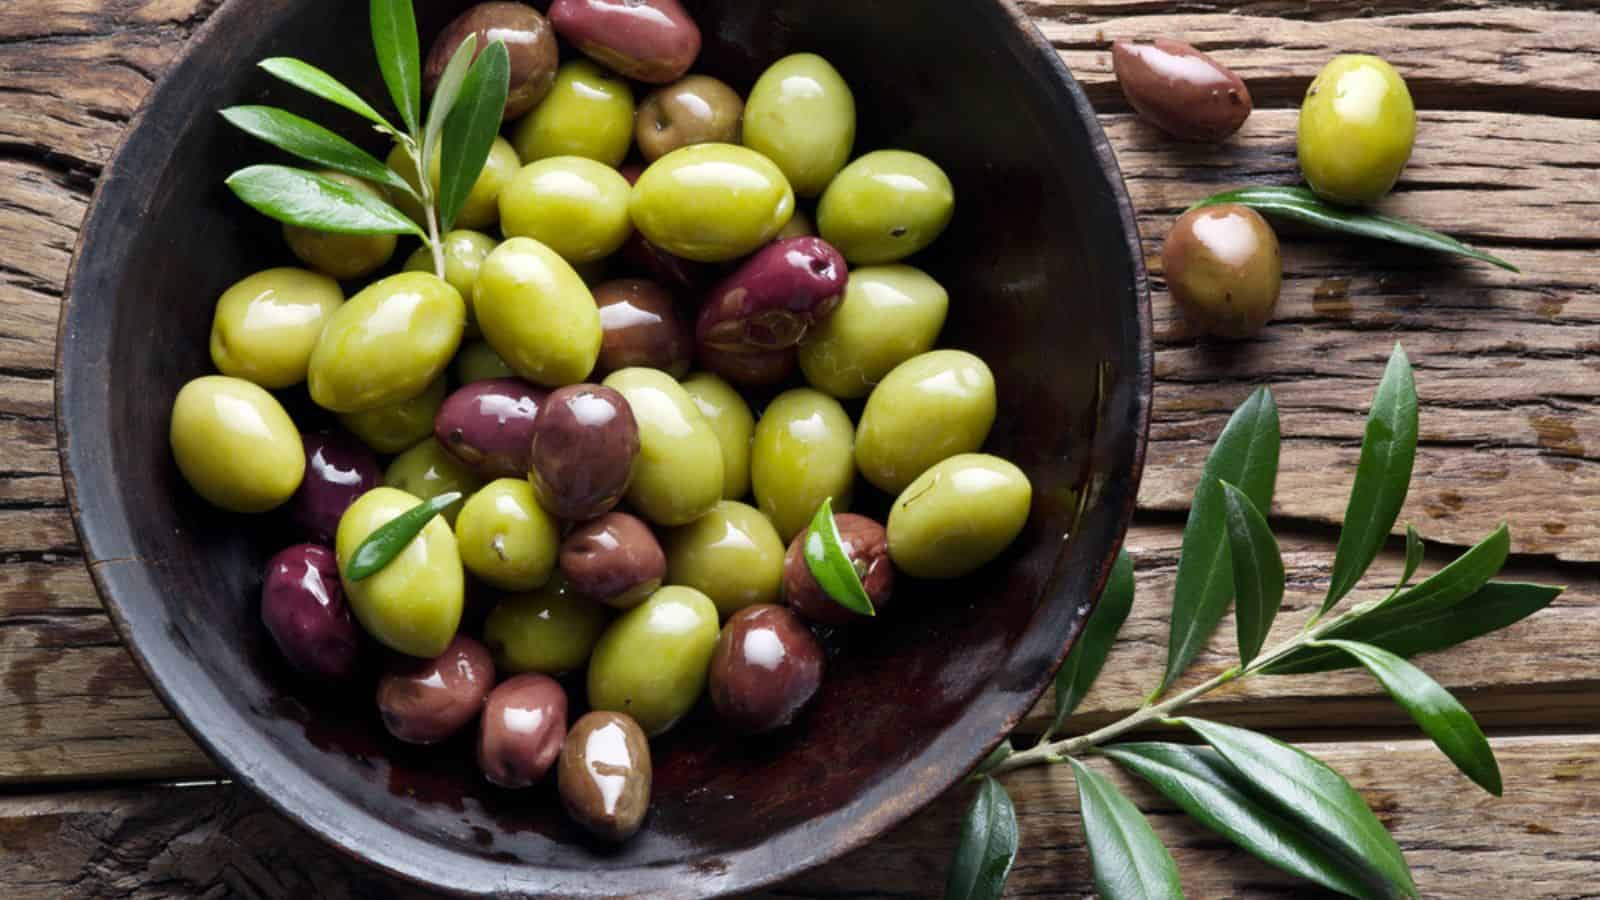 Wooden bowl full of olives and olive twigs besides it